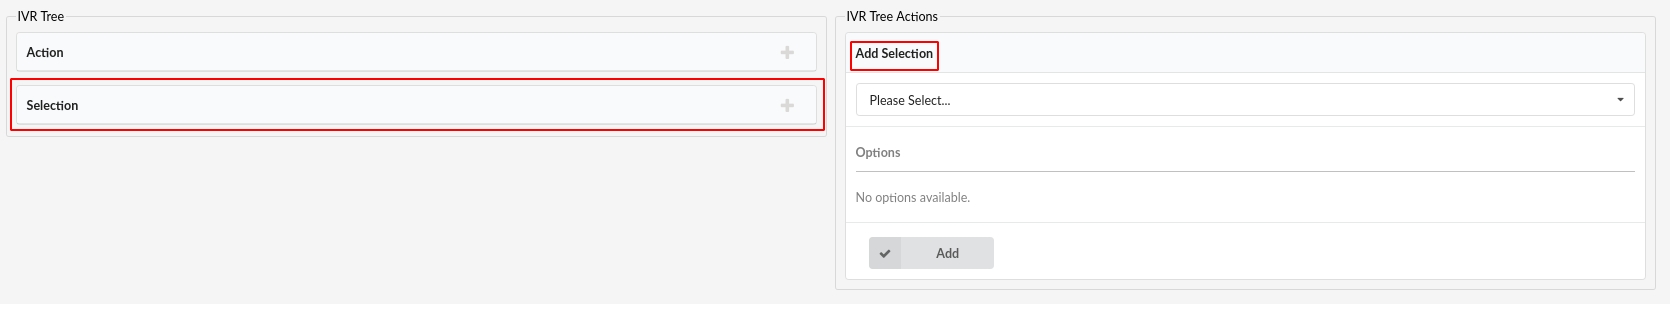 34-add-selection-ivr.png